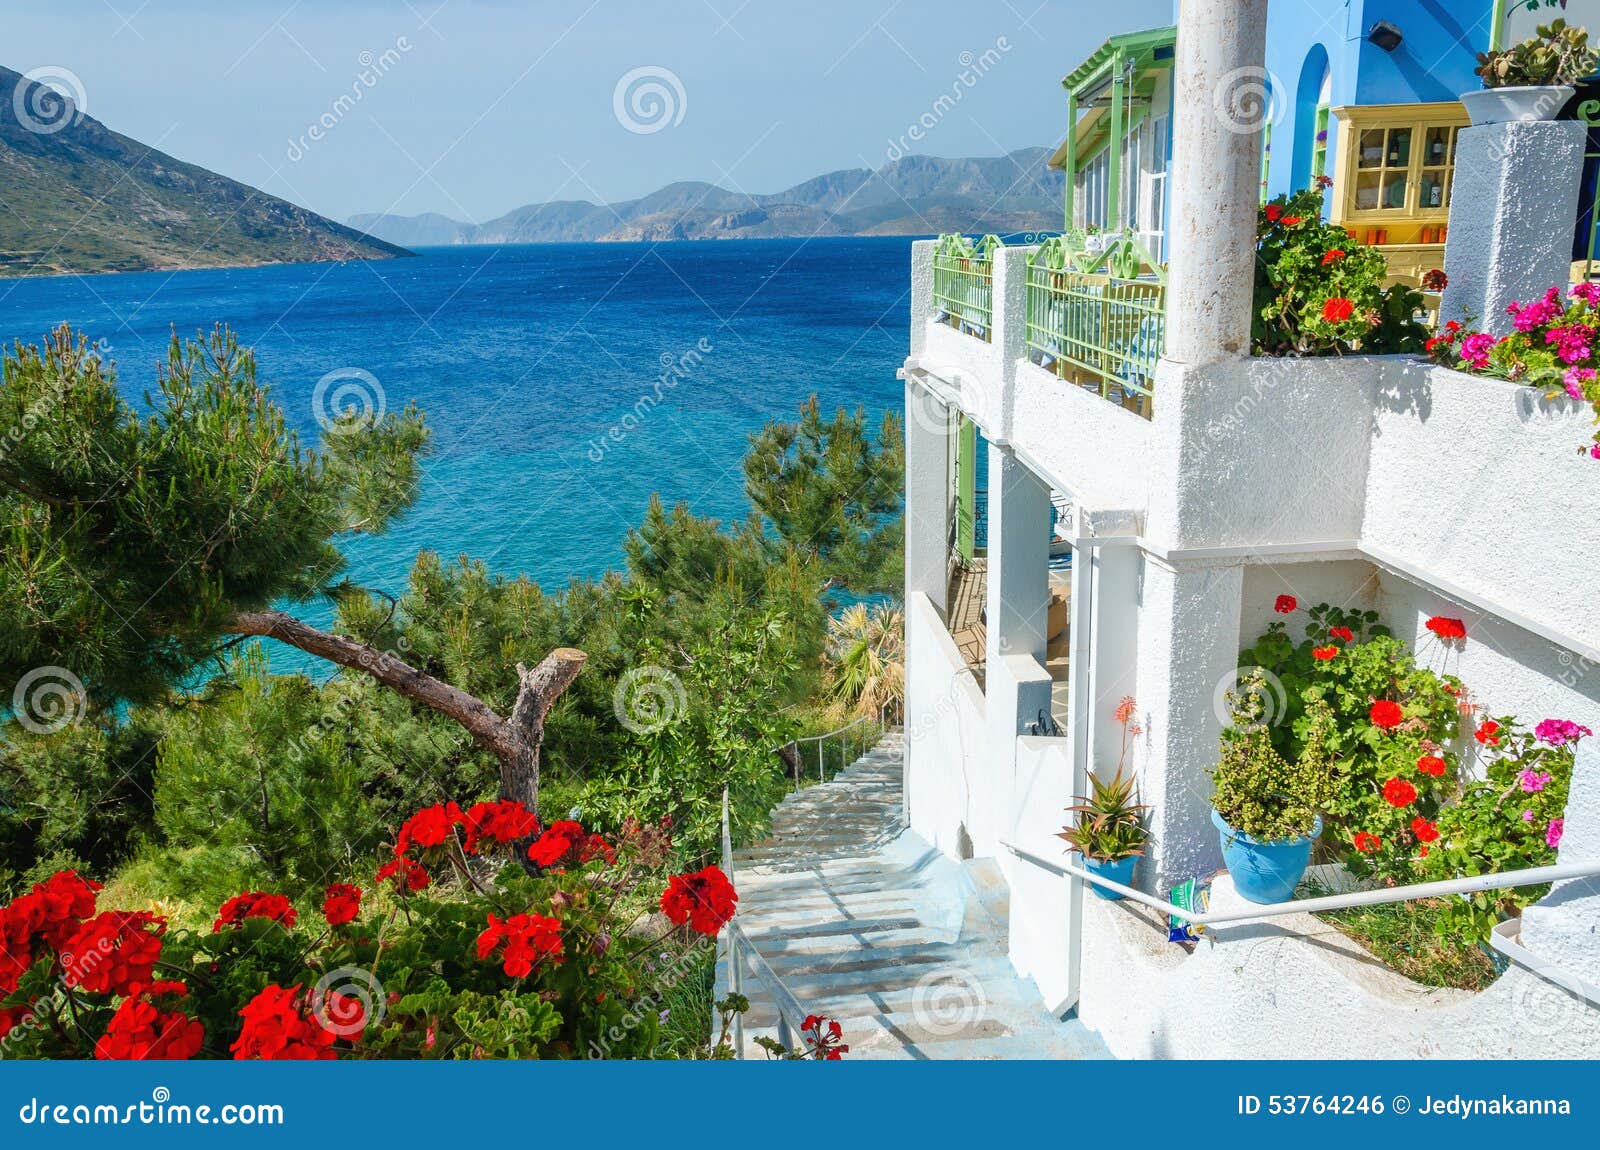 Panoramic view on typical Greek studio with flowers and white teracce having clear view on sea landspace with islands, Greece